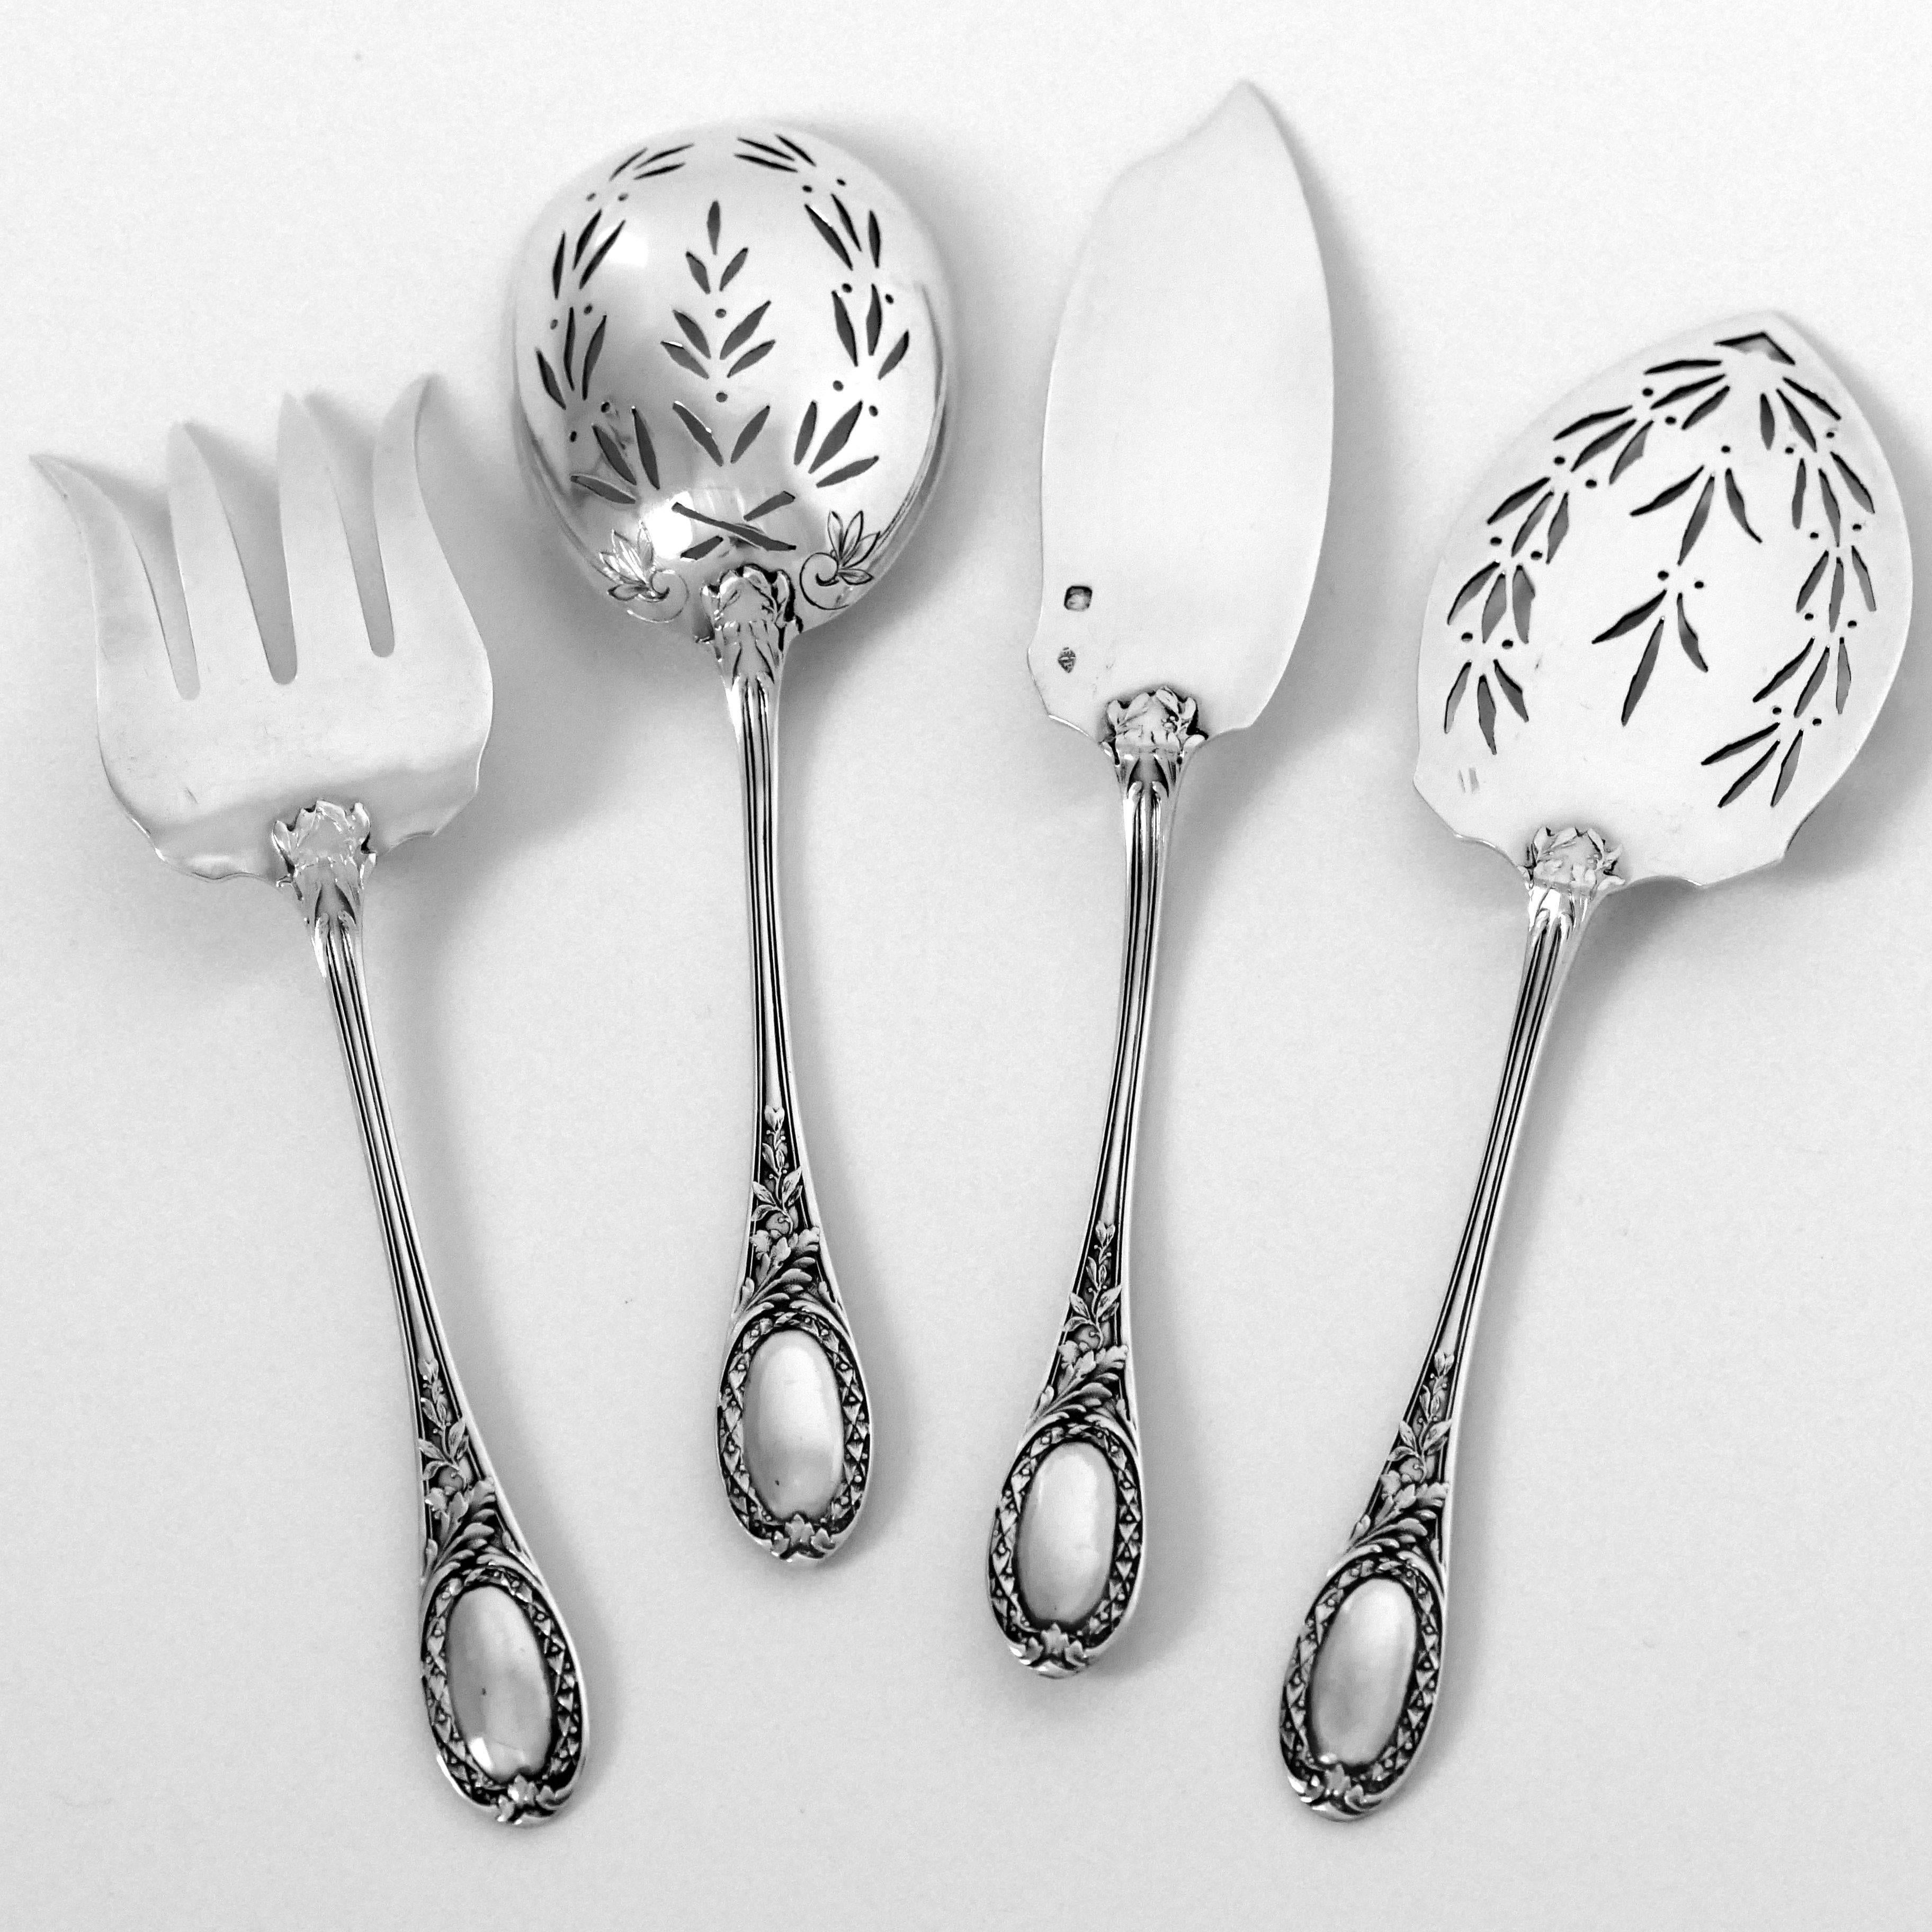 Puiforcat French Sterling Silver Dessert Hors D'oeuvre Set, Box, Neoclassical For Sale 2